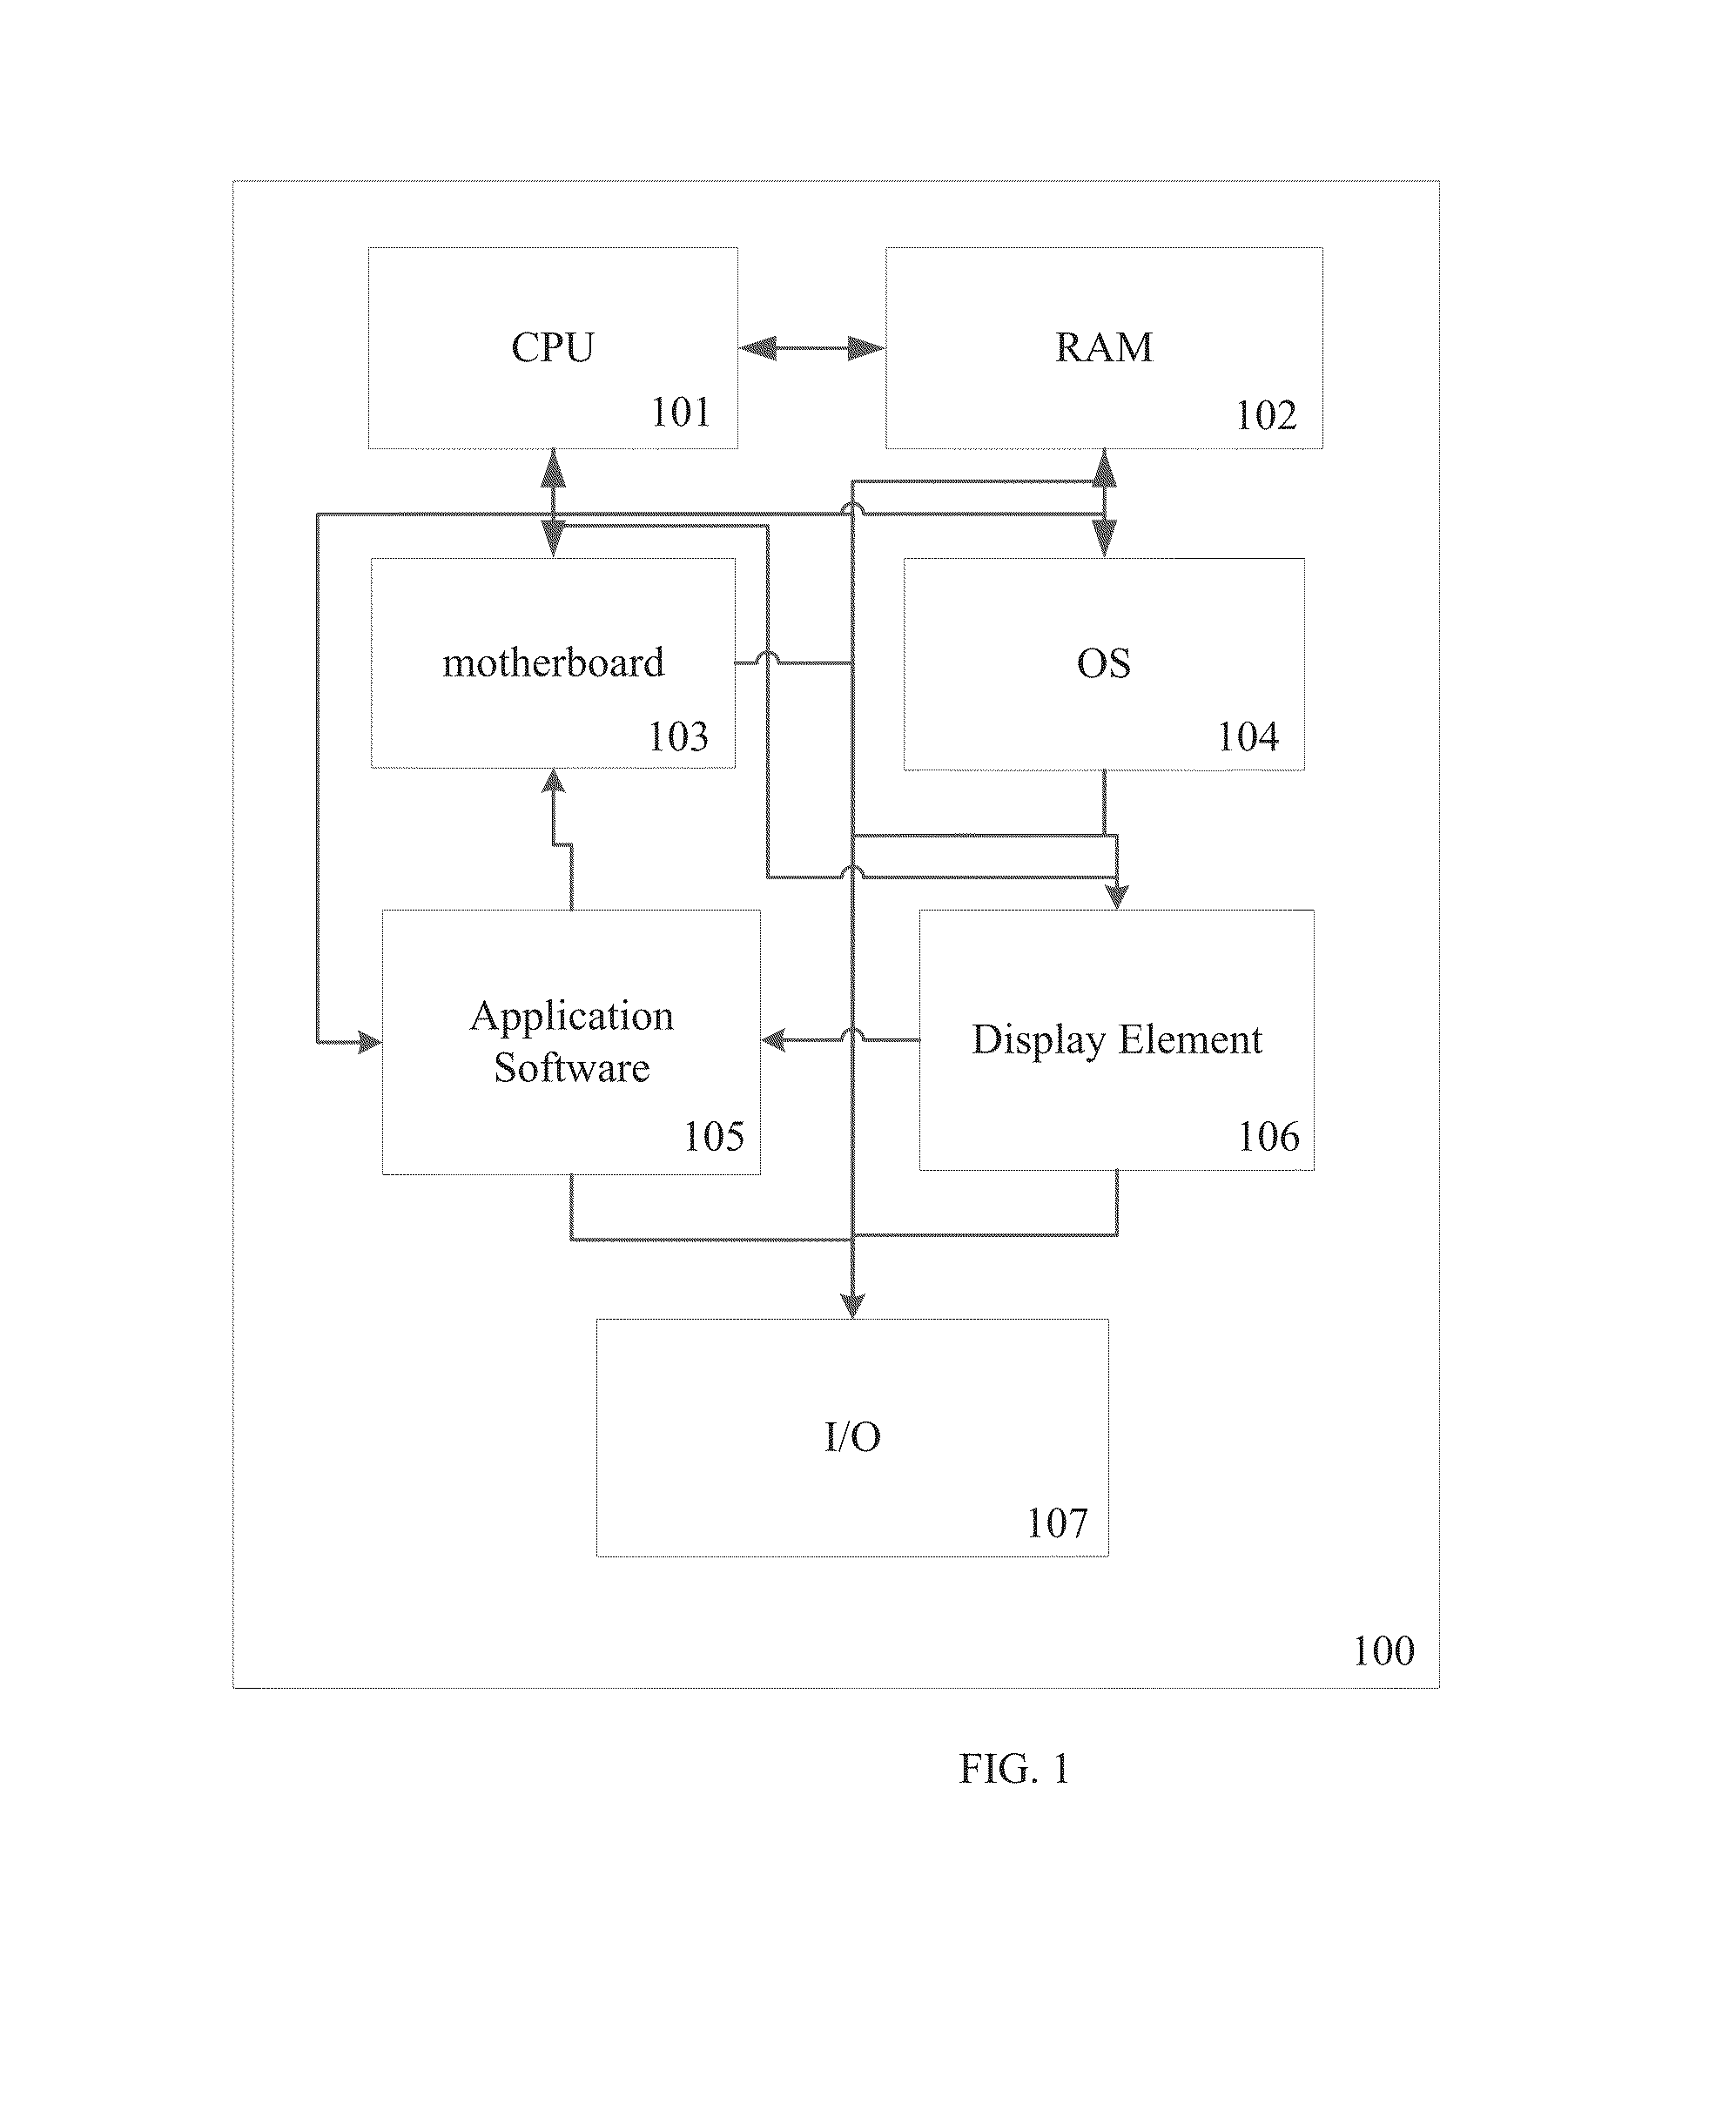 System and method for dynamic imagery link synchronization  and simulating rendering and behavior of content across a multi-client platform